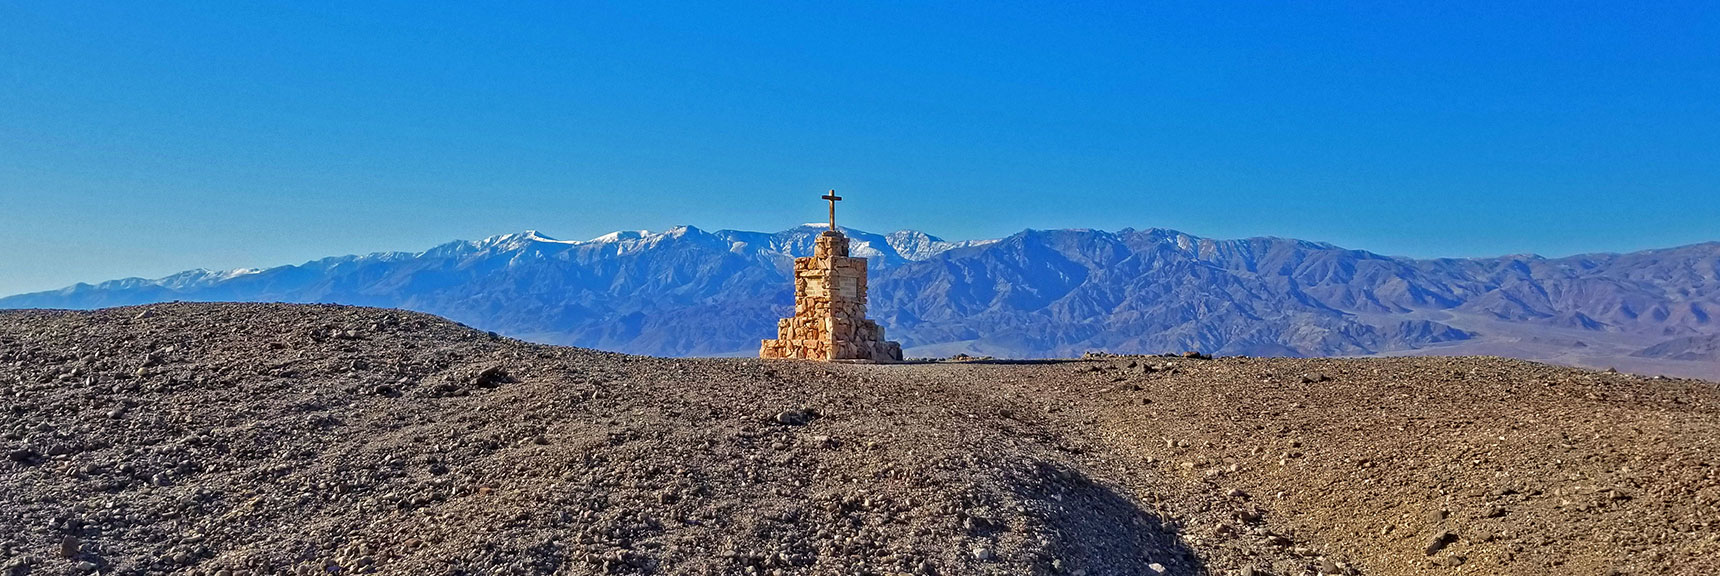 Memorial to Early Explorers and Prospectors on Tea House Access Ridge | Tea House & Table Rock Circuit | Furnace Creek | Death Valley National Park, California